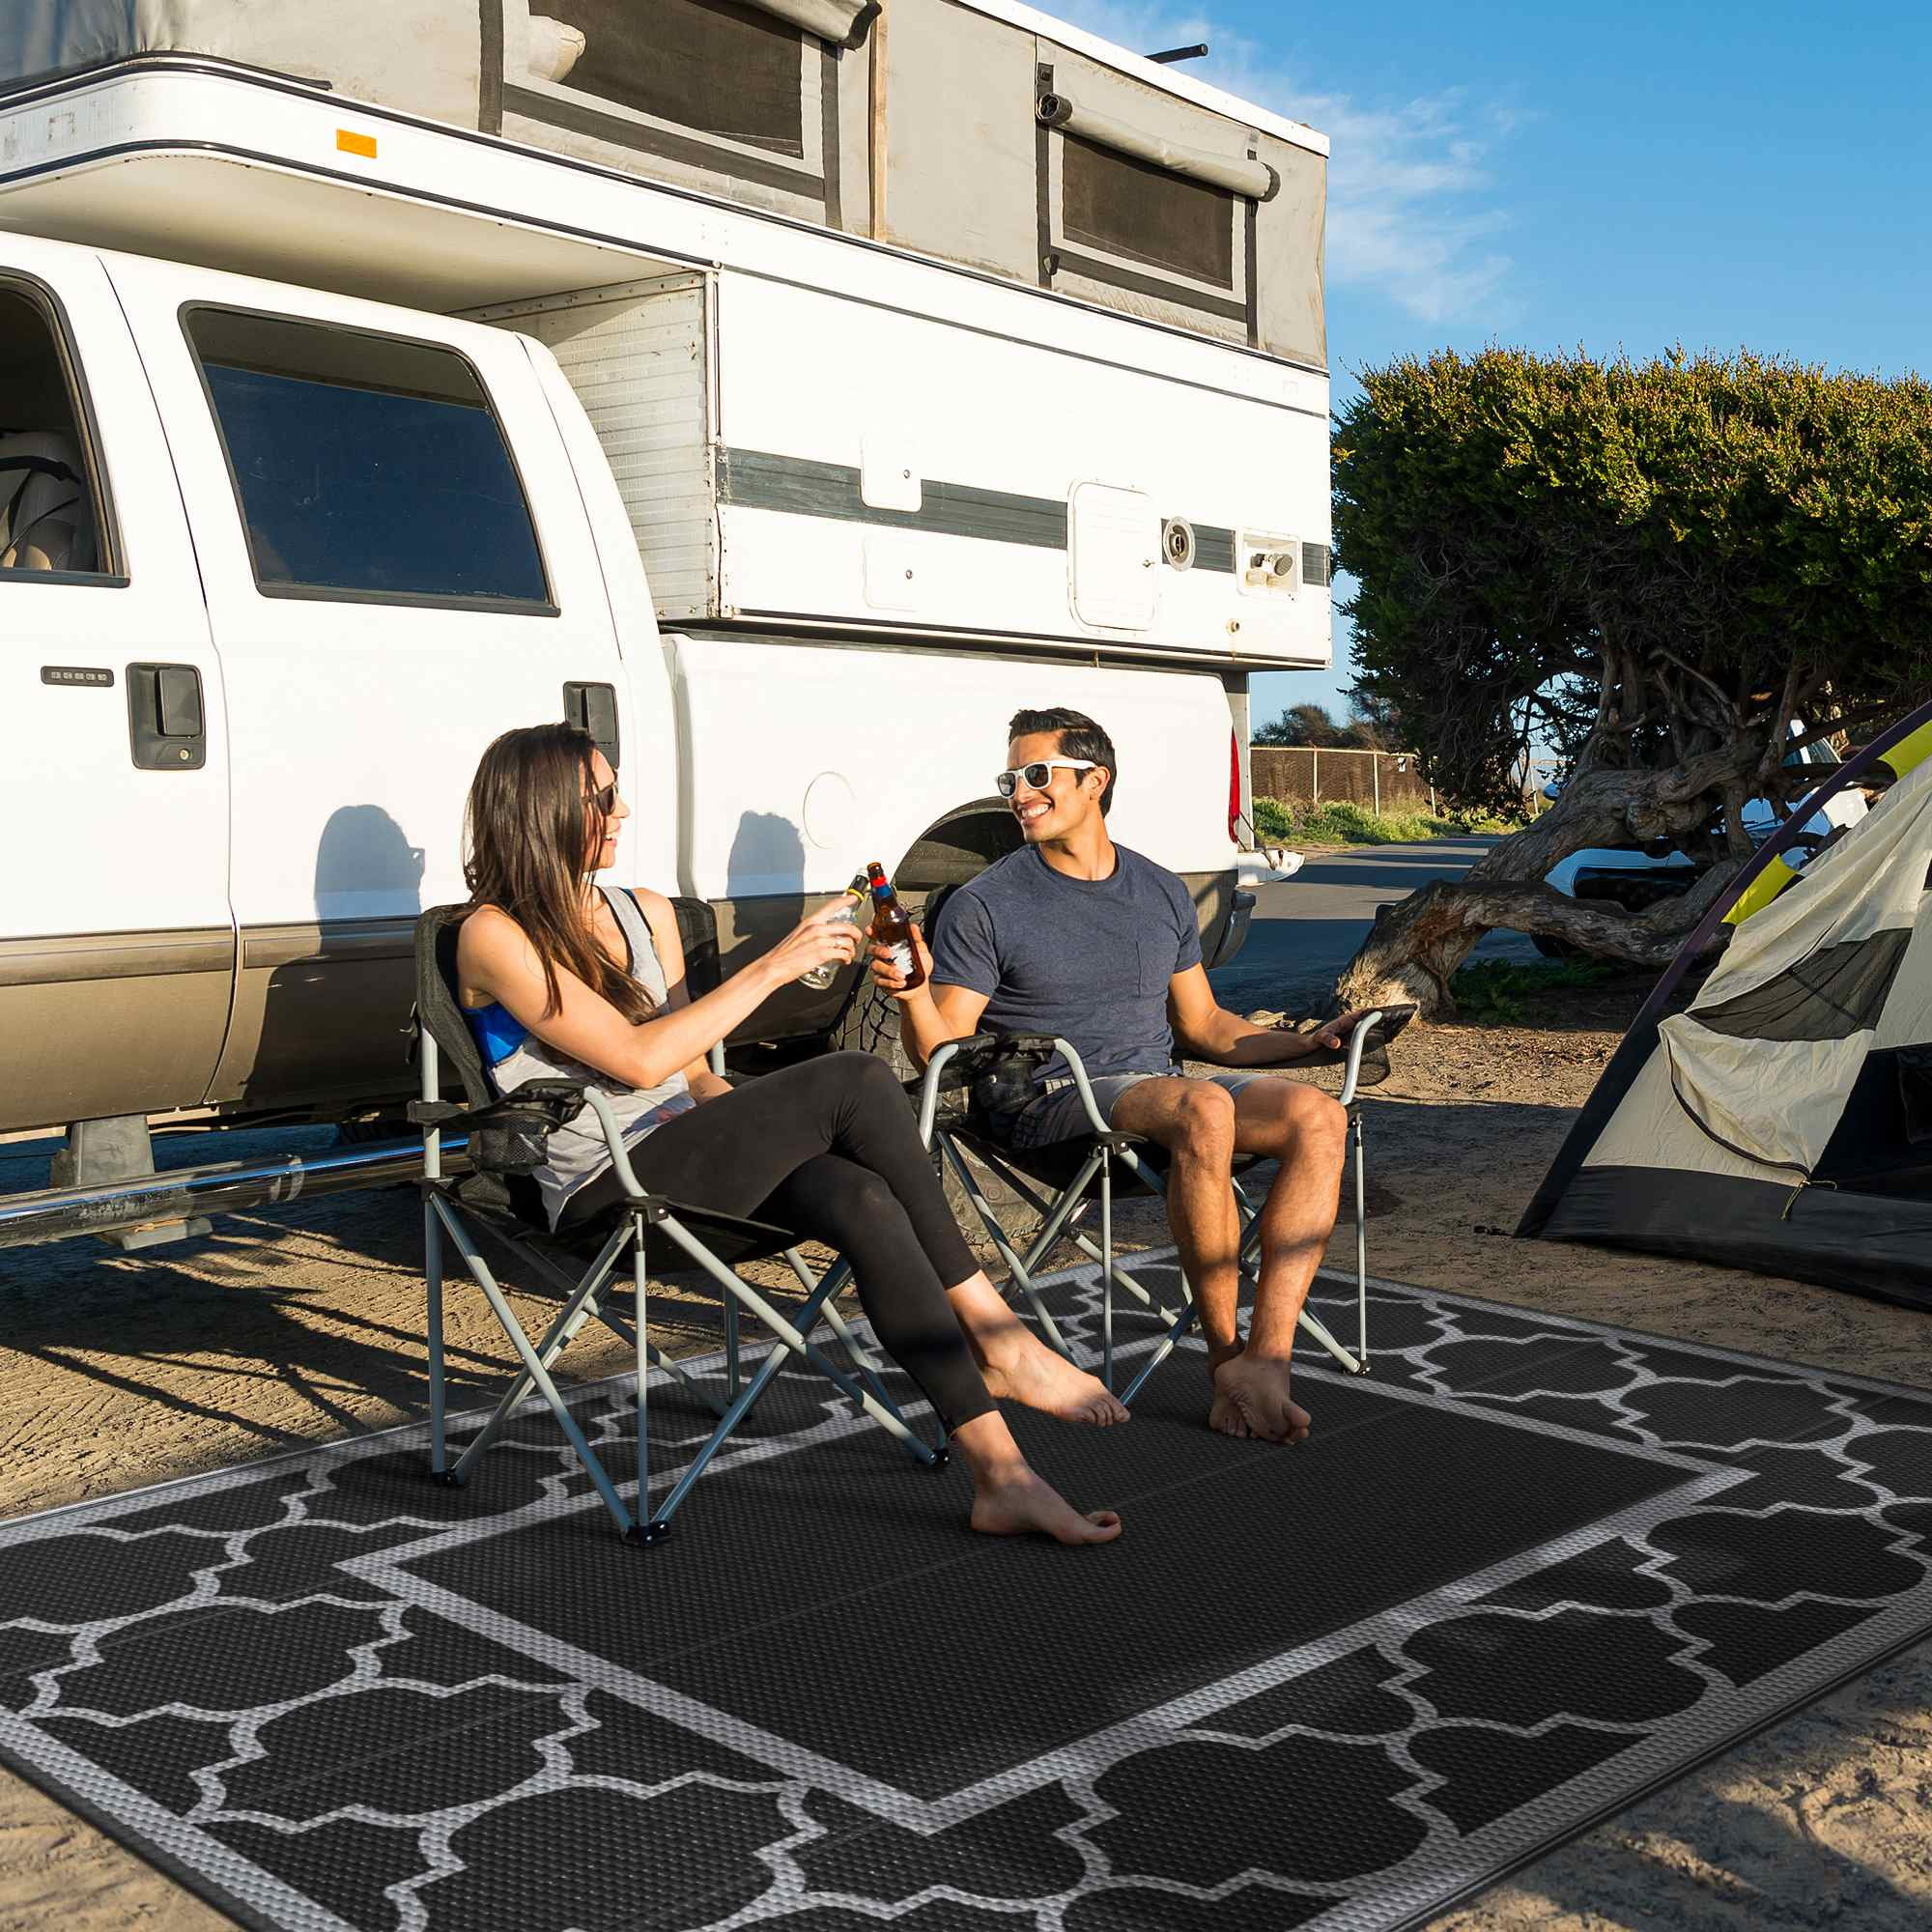 Walmart's Outdoor Rugs Are Marked Down to Under $30 – SheKnows